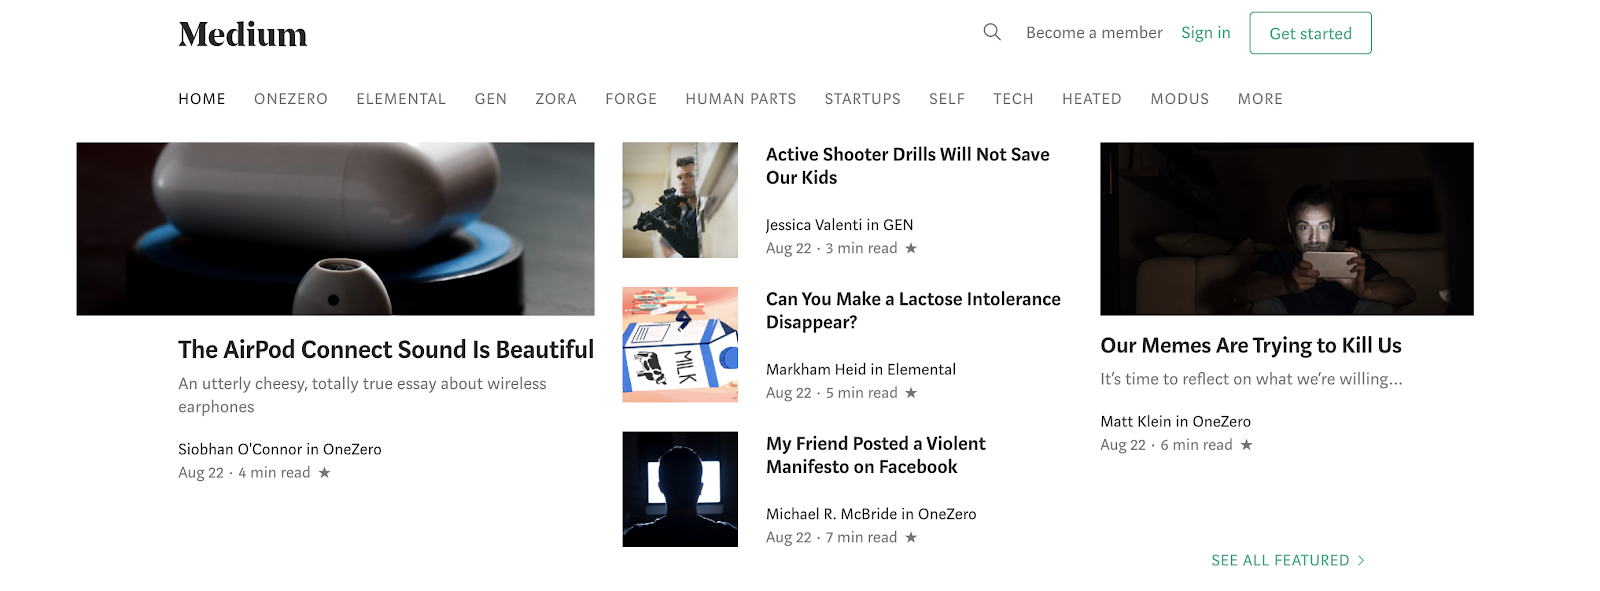 Medium as a Free Blogging Site to Use for Getting Started Today